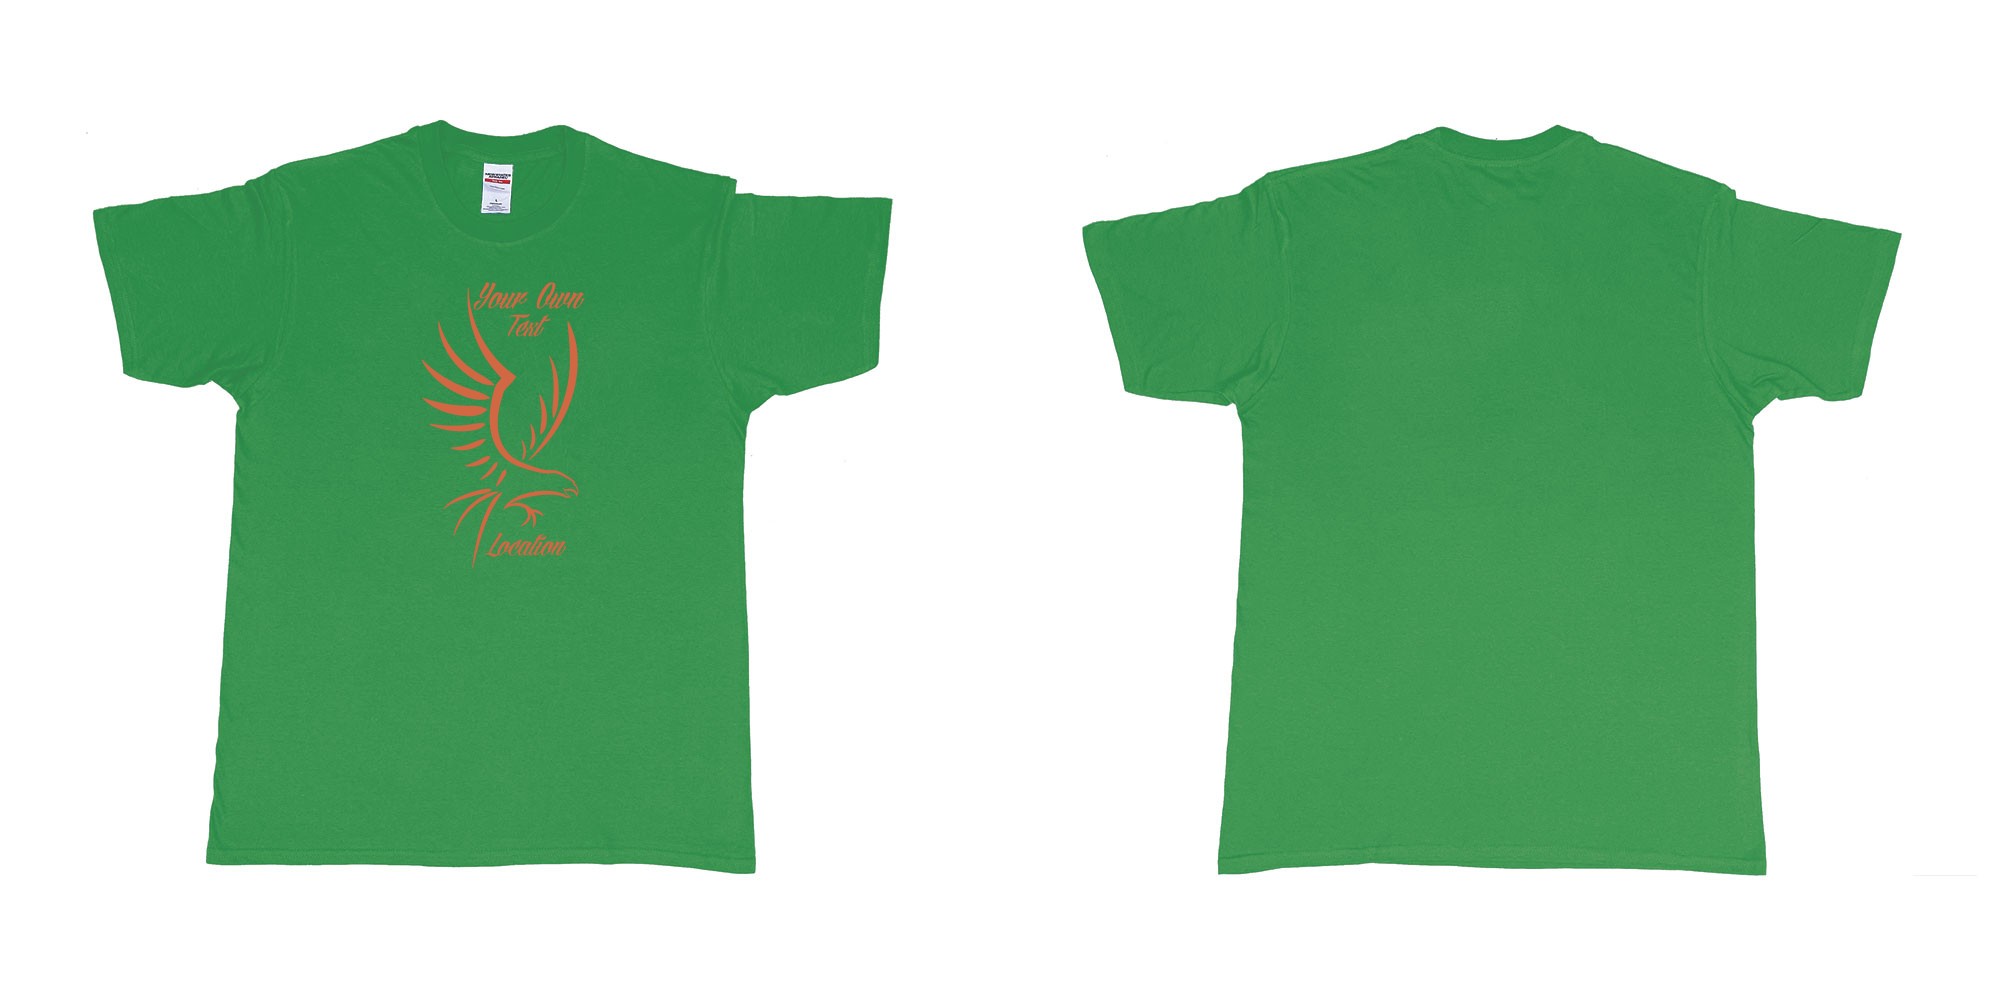 Custom tshirt design custom eagle drawing custom text in fabric color irish-green choice your own text made in Bali by The Pirate Way